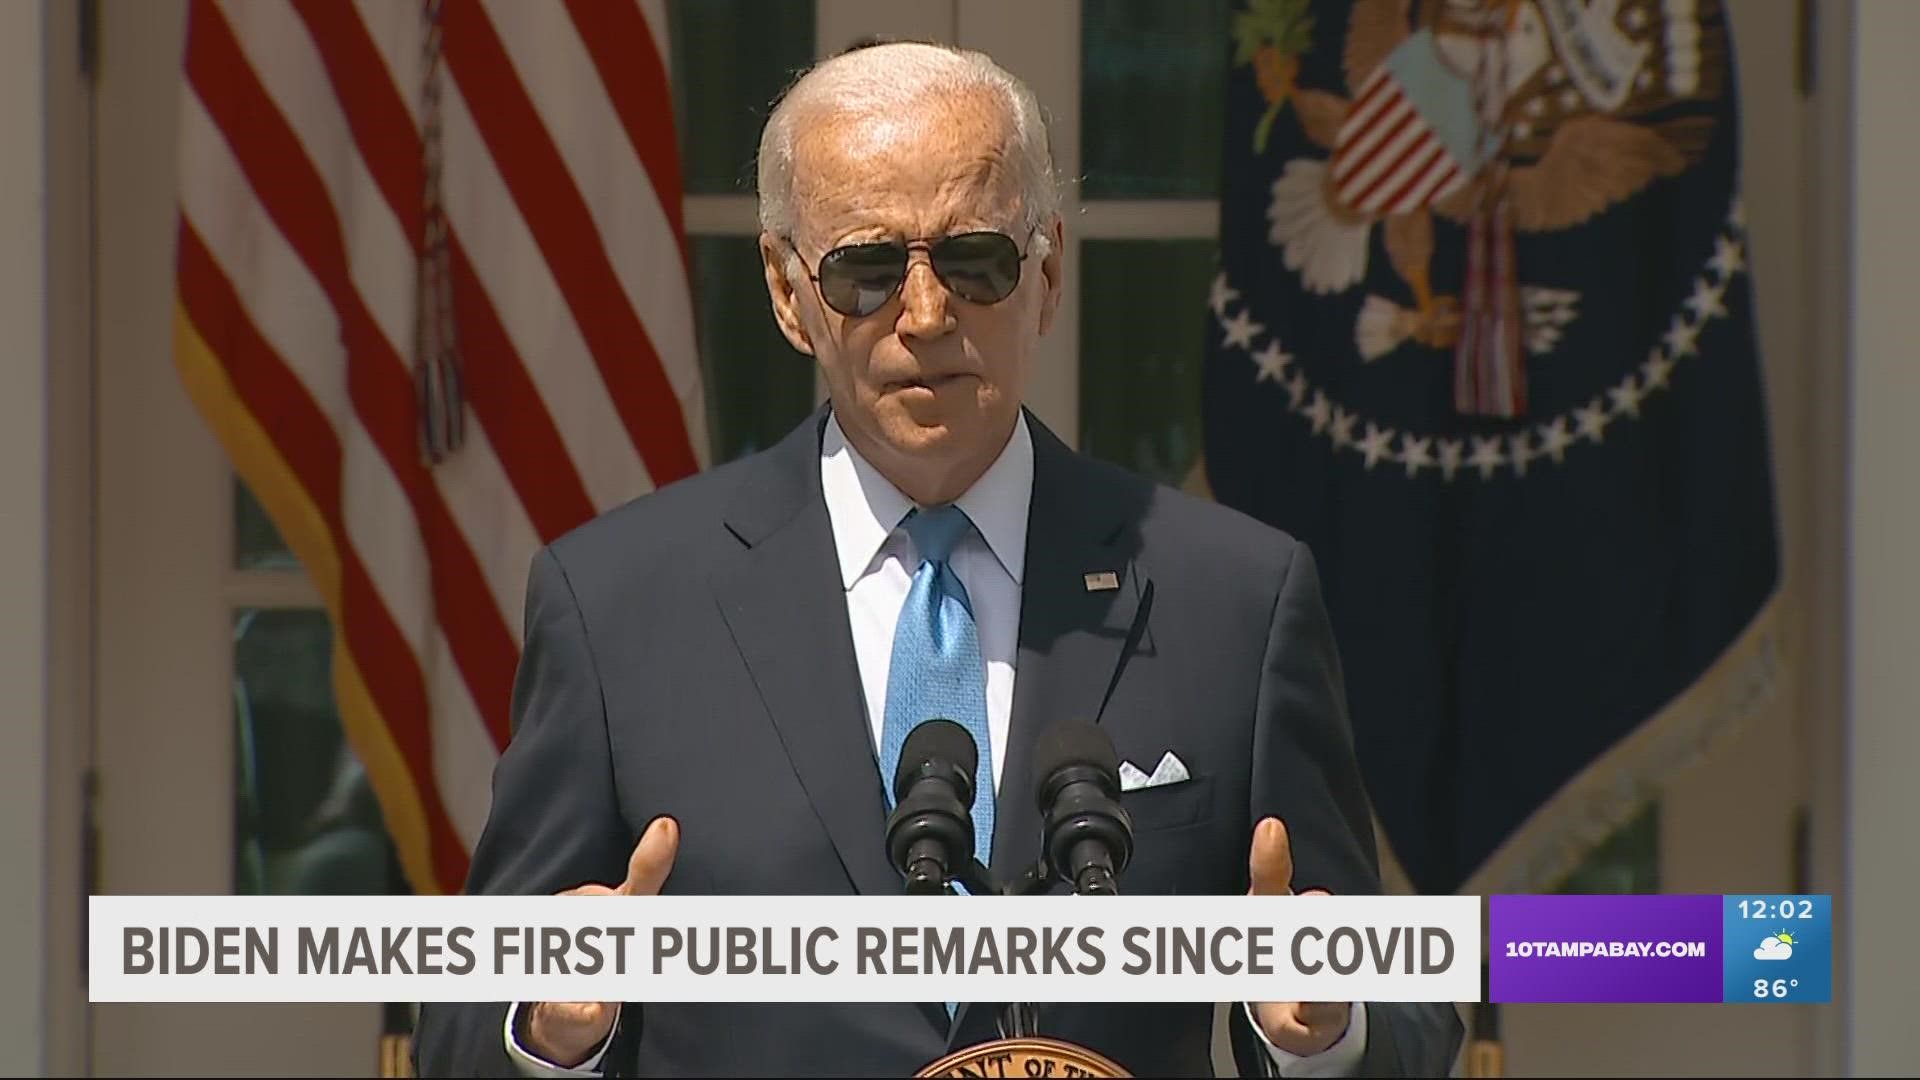 While President Biden said that "COVID isn't gone," he stressed that Americans can avoid serious illness with vaccines and available treatments.